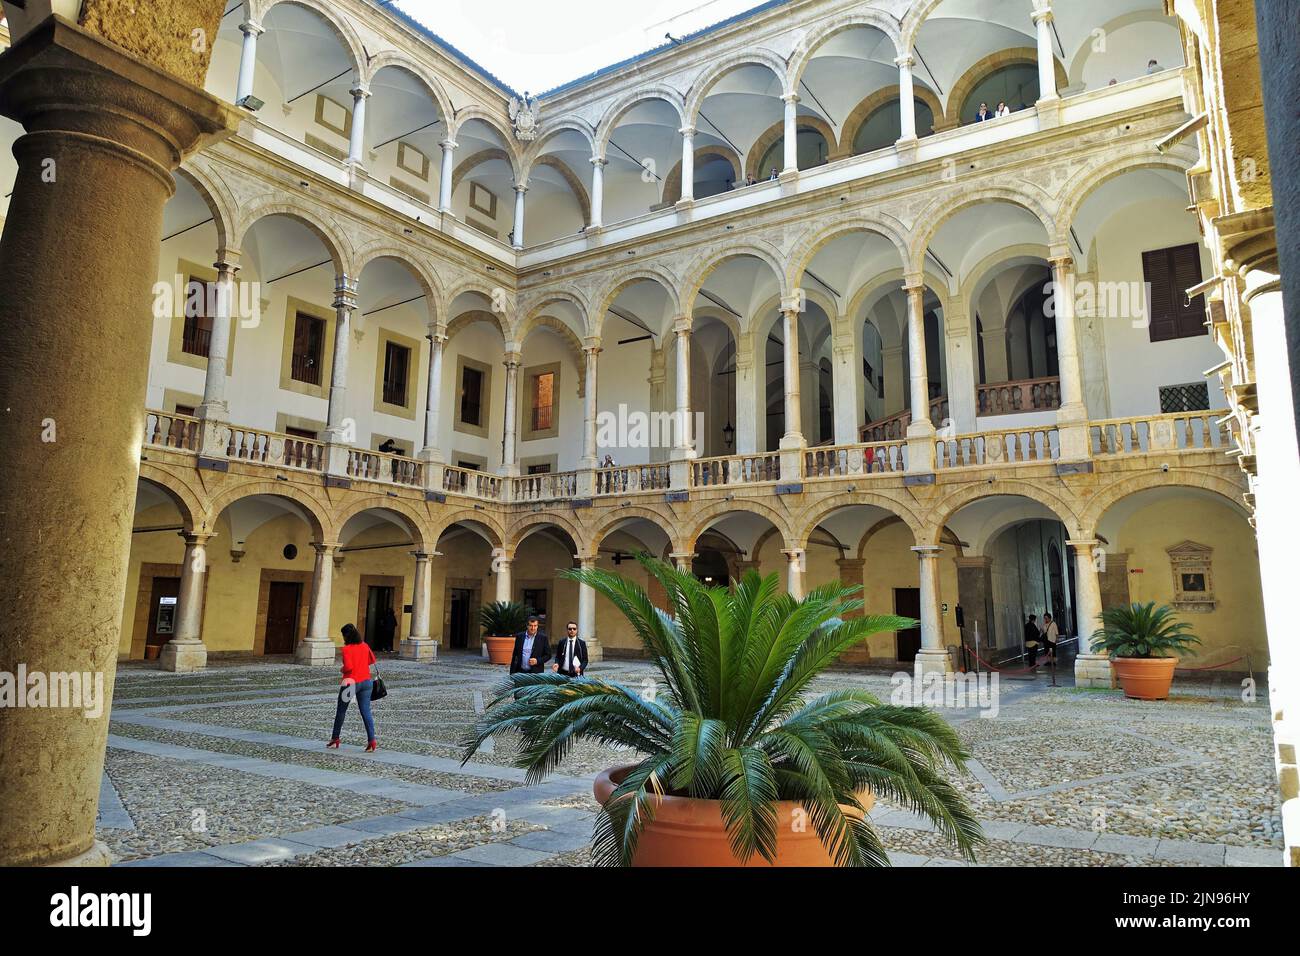 Old building courtyard, Palermo, Sicily, Italy, Europe Stock Photo